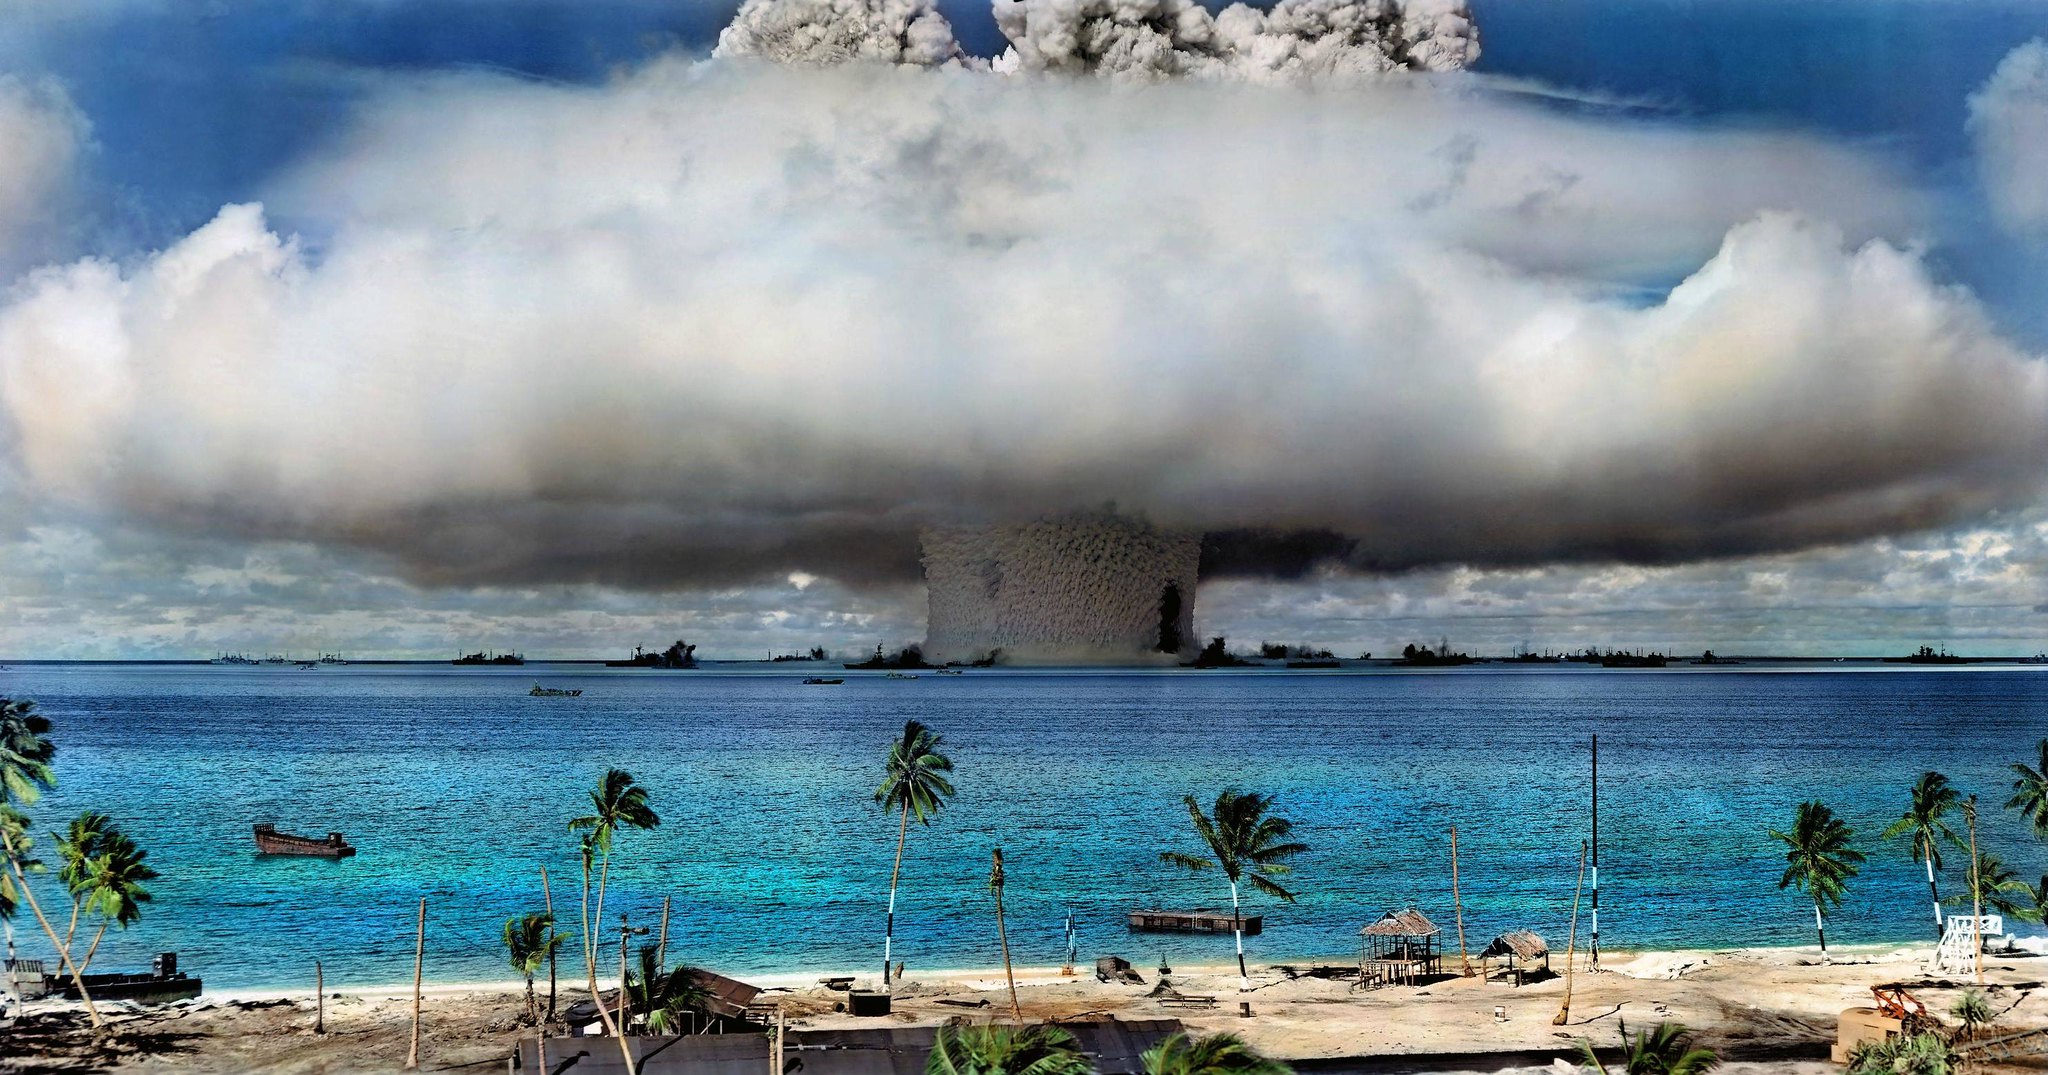 Colorized image of US nuclear weapons test at Bikini Atoll in the Marshall Islands in 1946 (original photograph by US Defense Department colorized by the International Campaign to Abolish Nuclear Weapons CC BY-NC 2.0 DEED via Flickr).